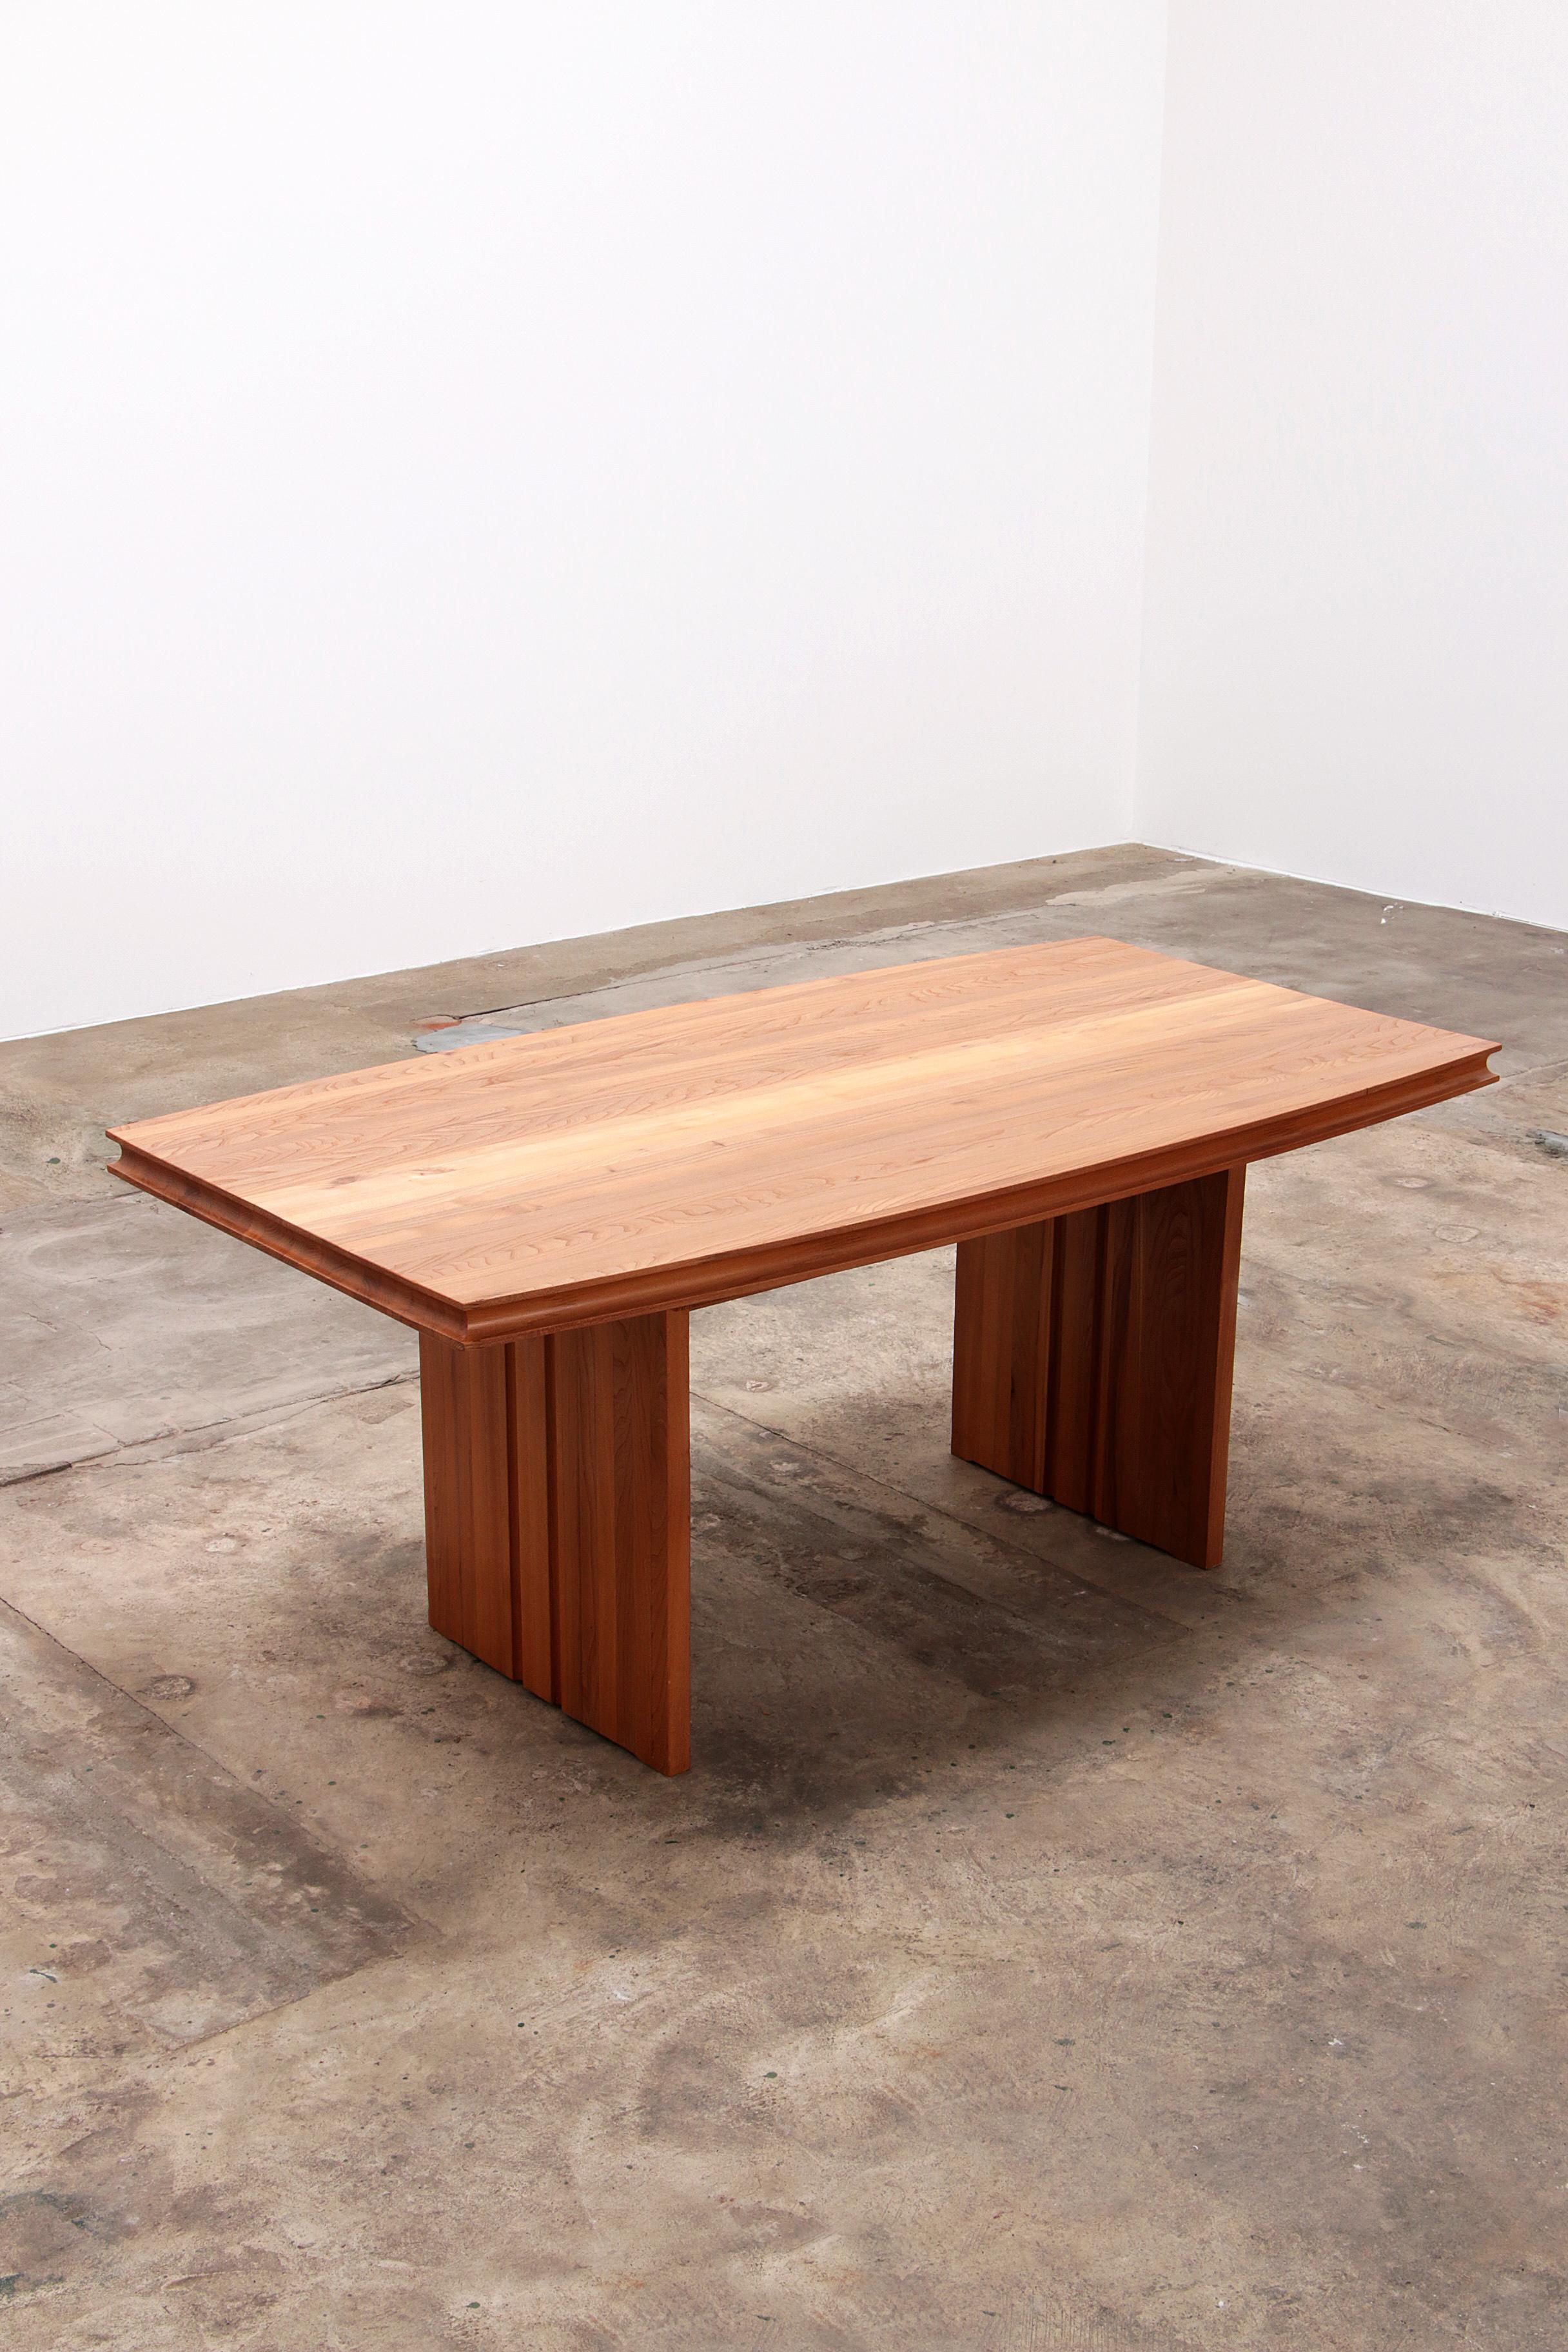 Large table made of light wood in perfect condition. The table has 2 heavy wooden legs. The table is in 1 piece and the top is fixed. This table could also serve very well in the office for the meeting.

The style of the table is very similar to the